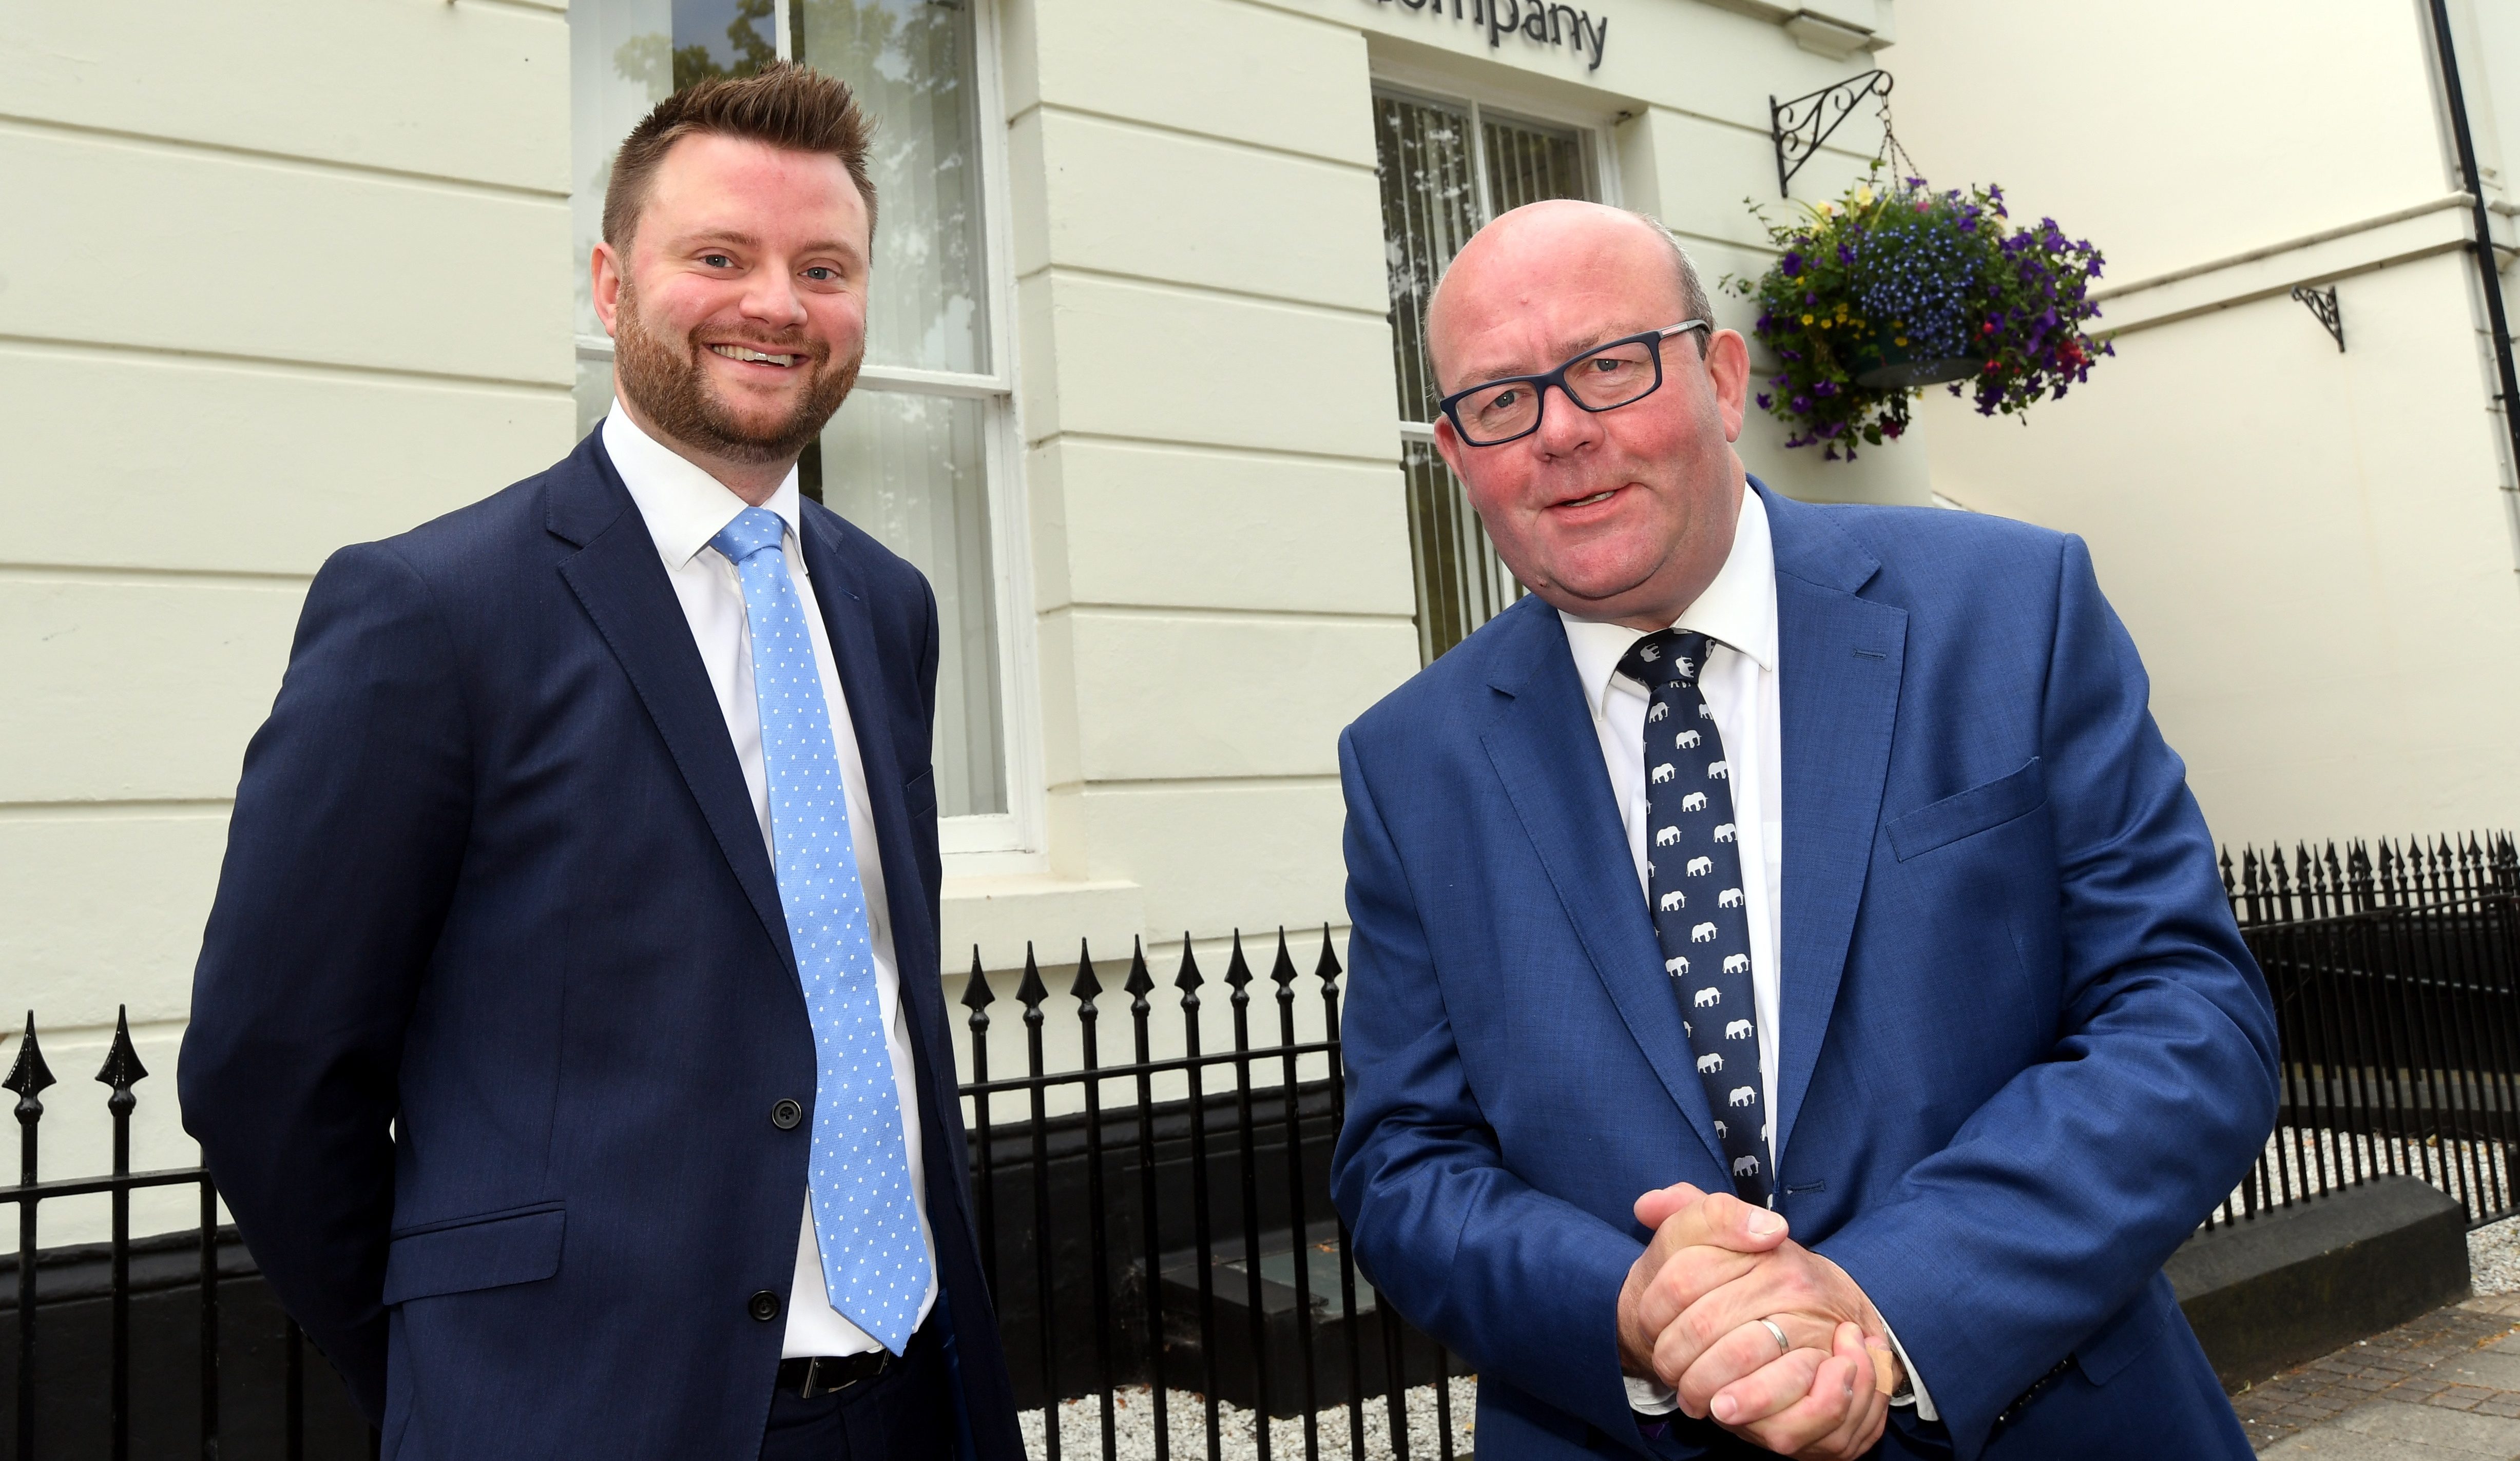 A Royal Leamington Spa/Midlands property consultancy has added new blood to aid the company’s growth.